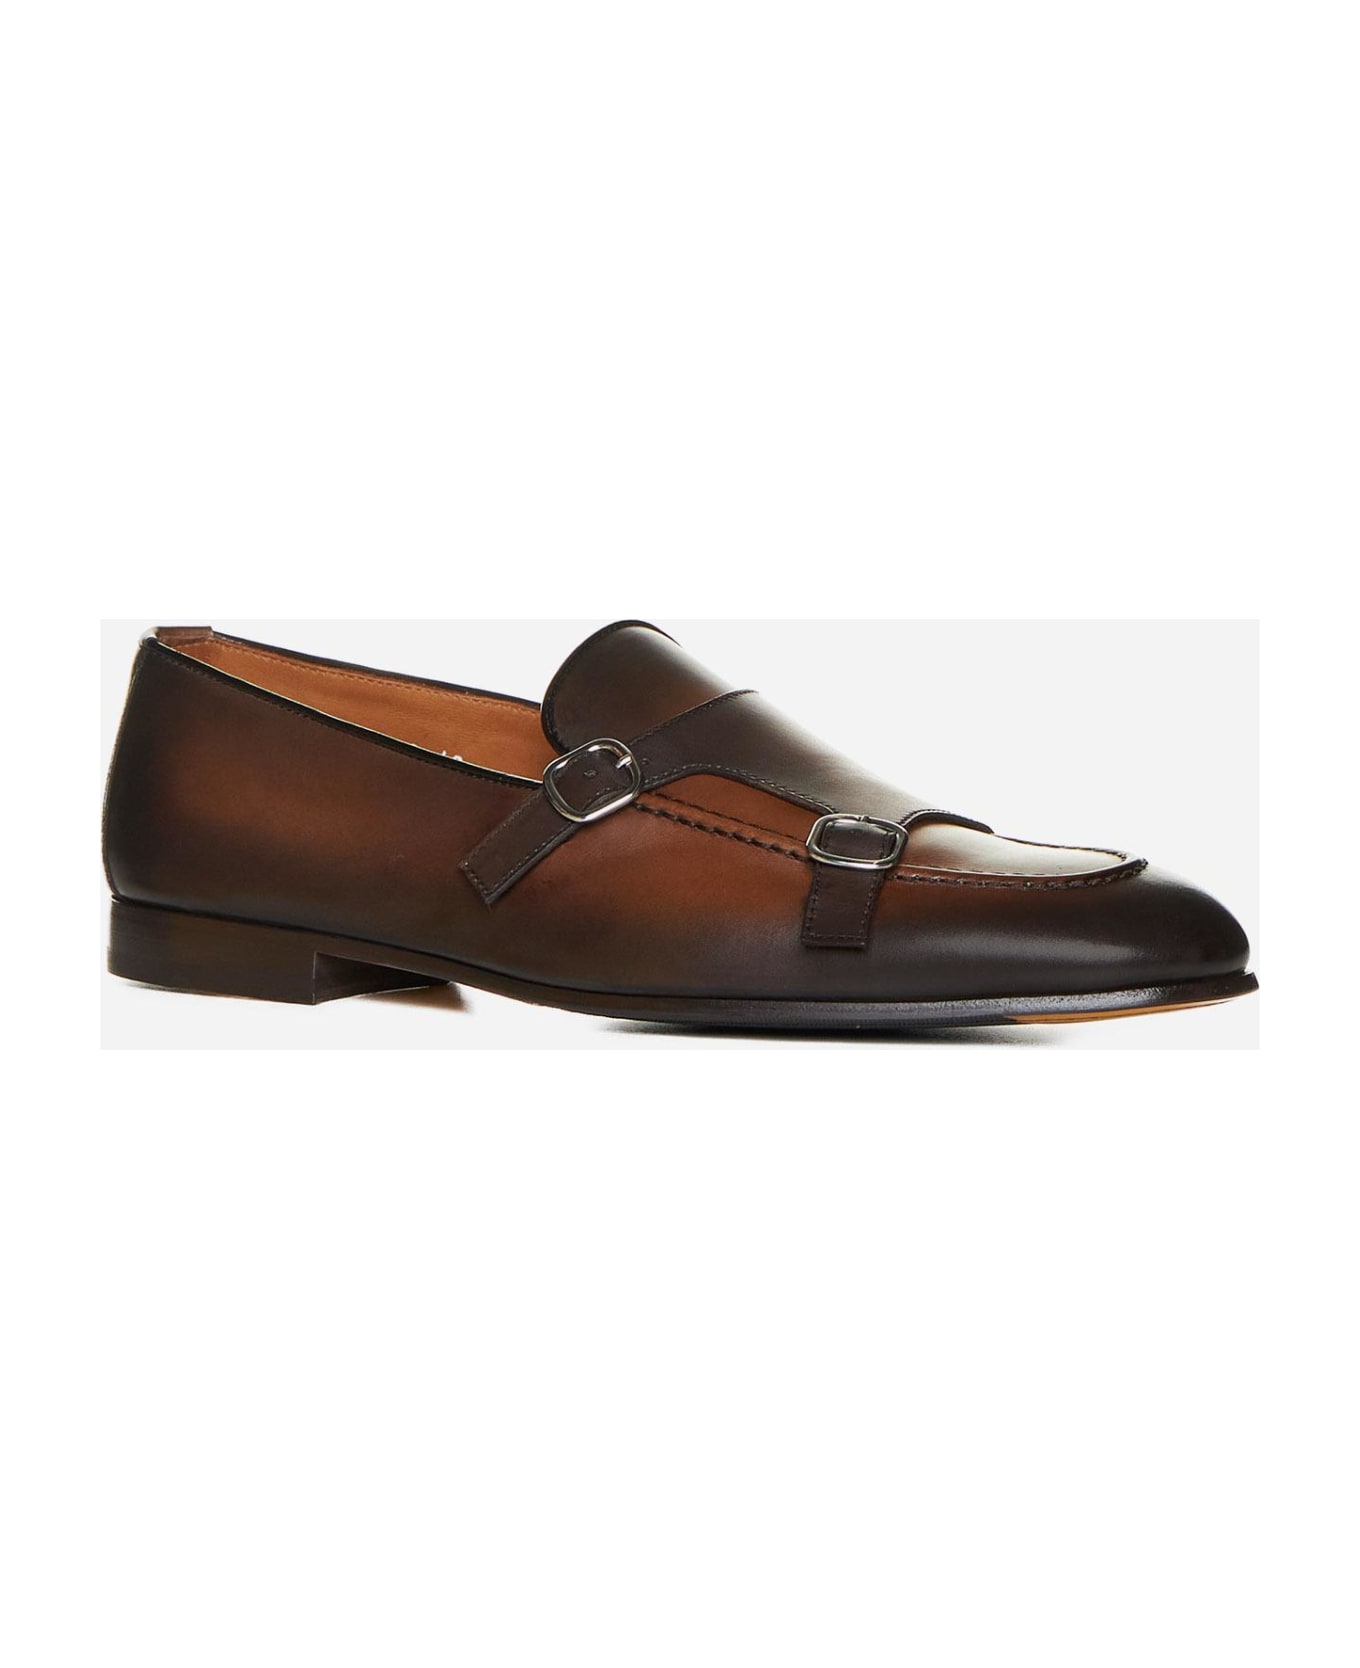 Doucal's Adler Leather Monk Straps - BROWN ローファー＆デッキシューズ